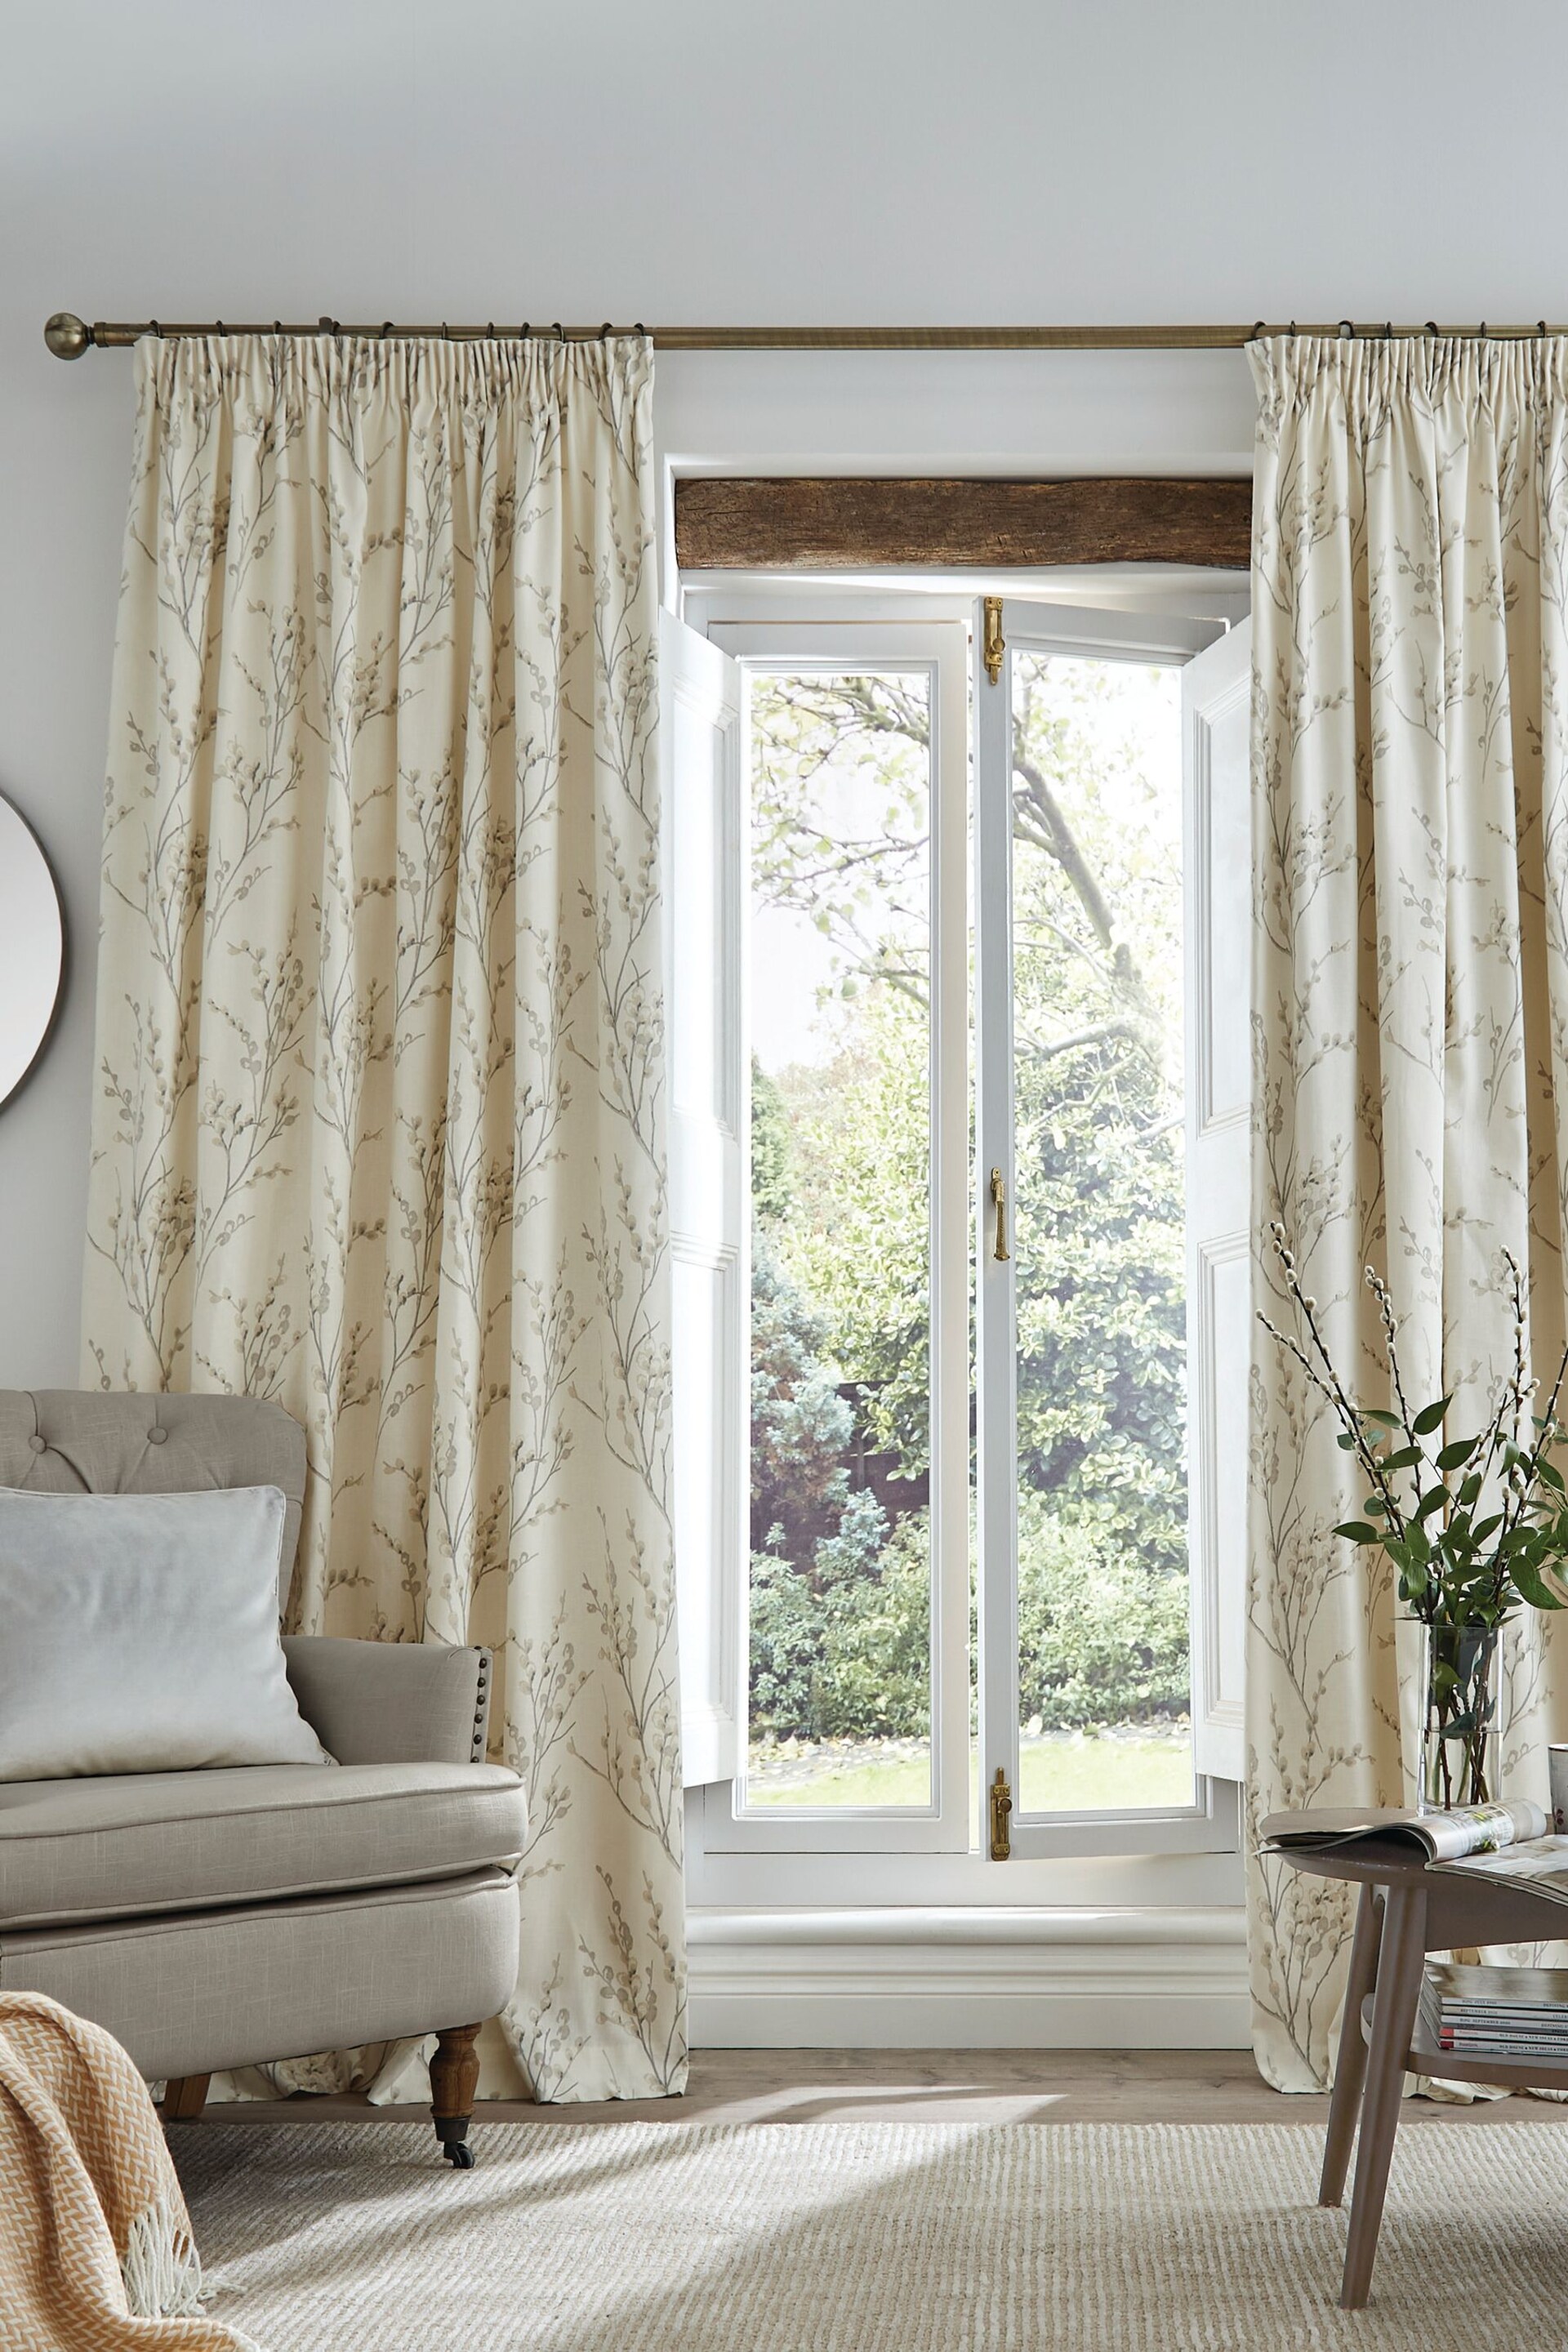 Laura Ashley Off White/Dove Grey Pussy Willow Lined Eyelet Curtains - Image 1 of 2